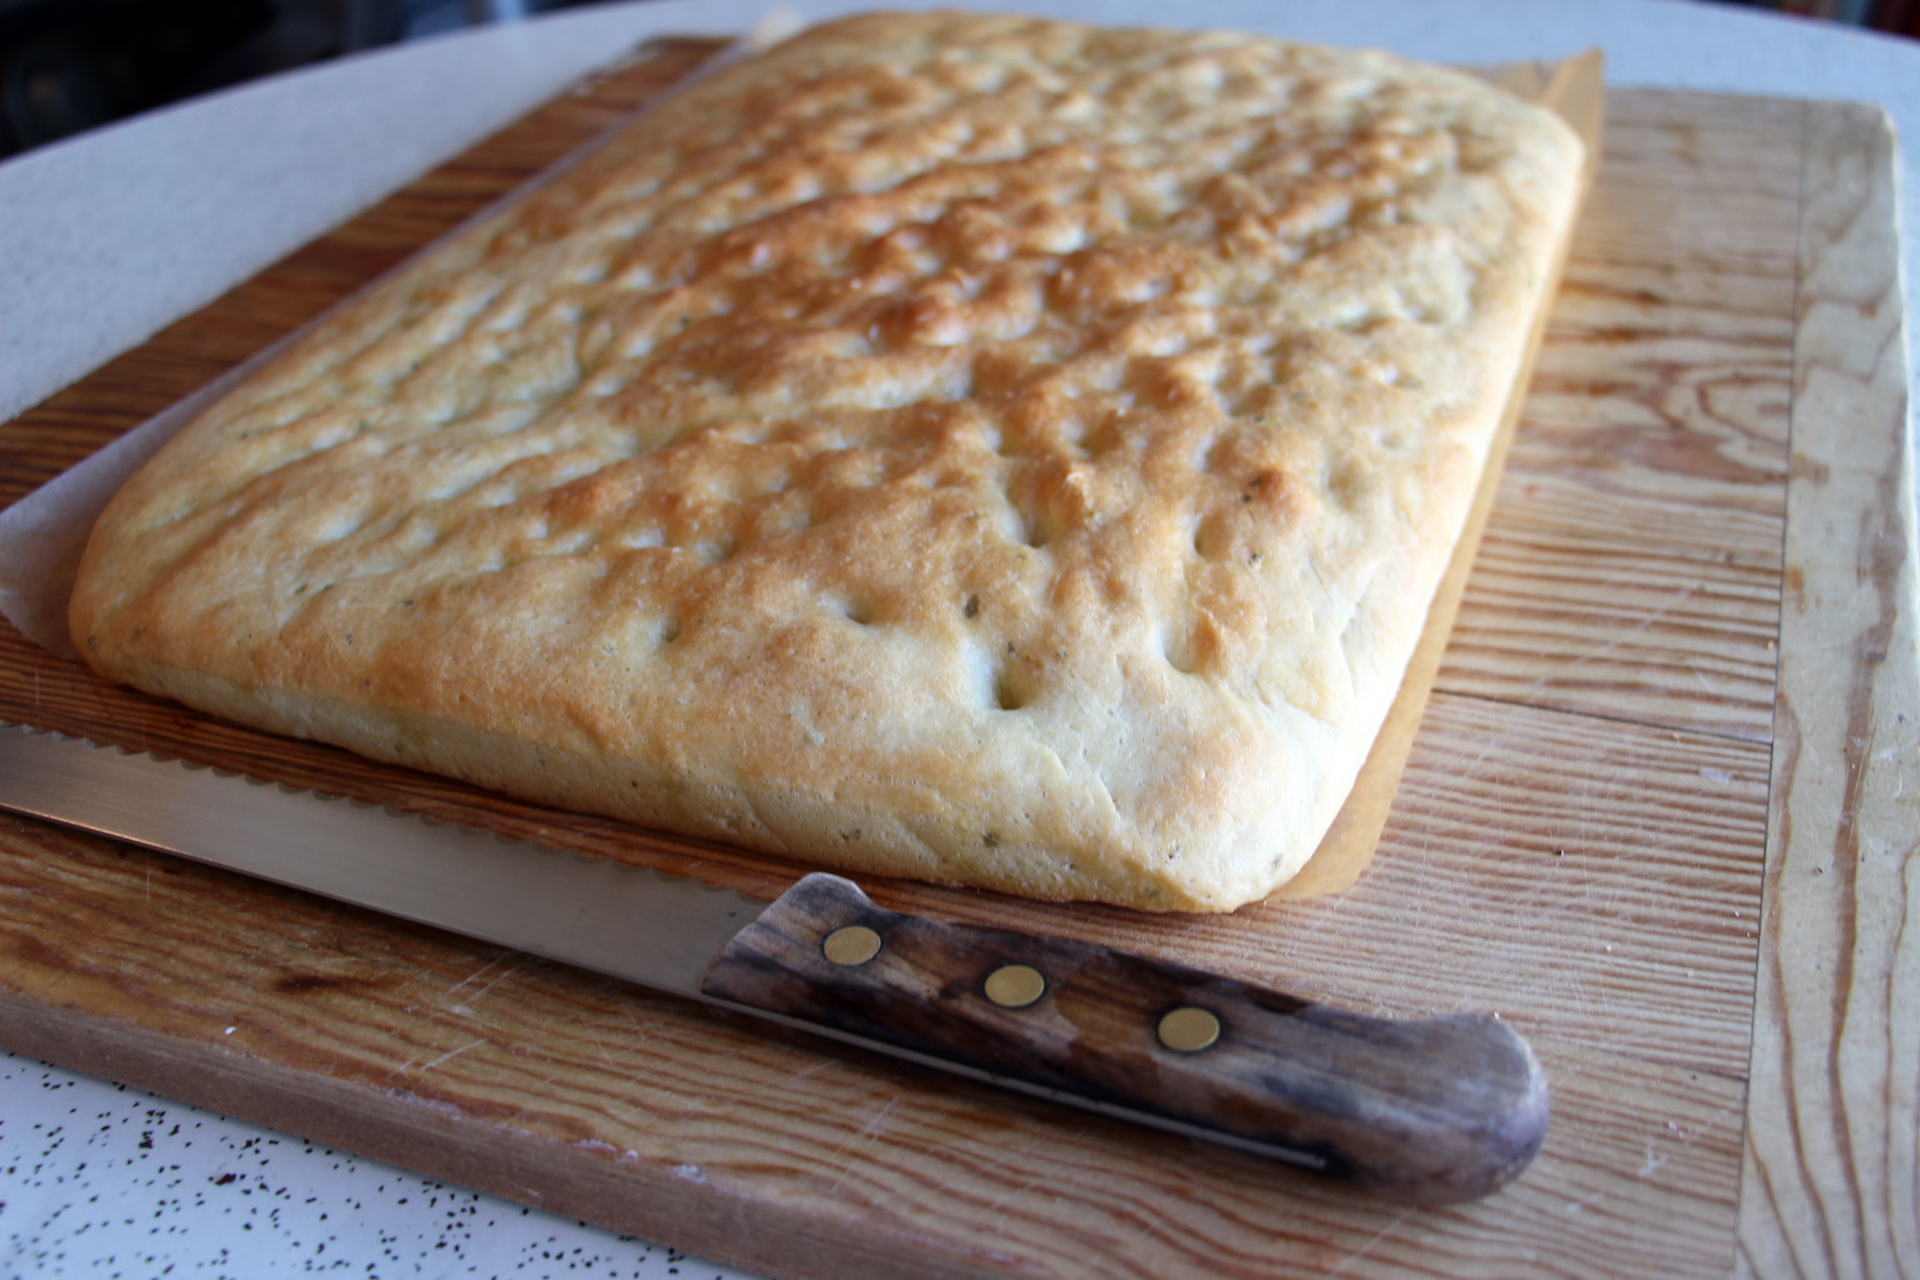 Freshly baked Rosemary Focaccia right out of the oven.